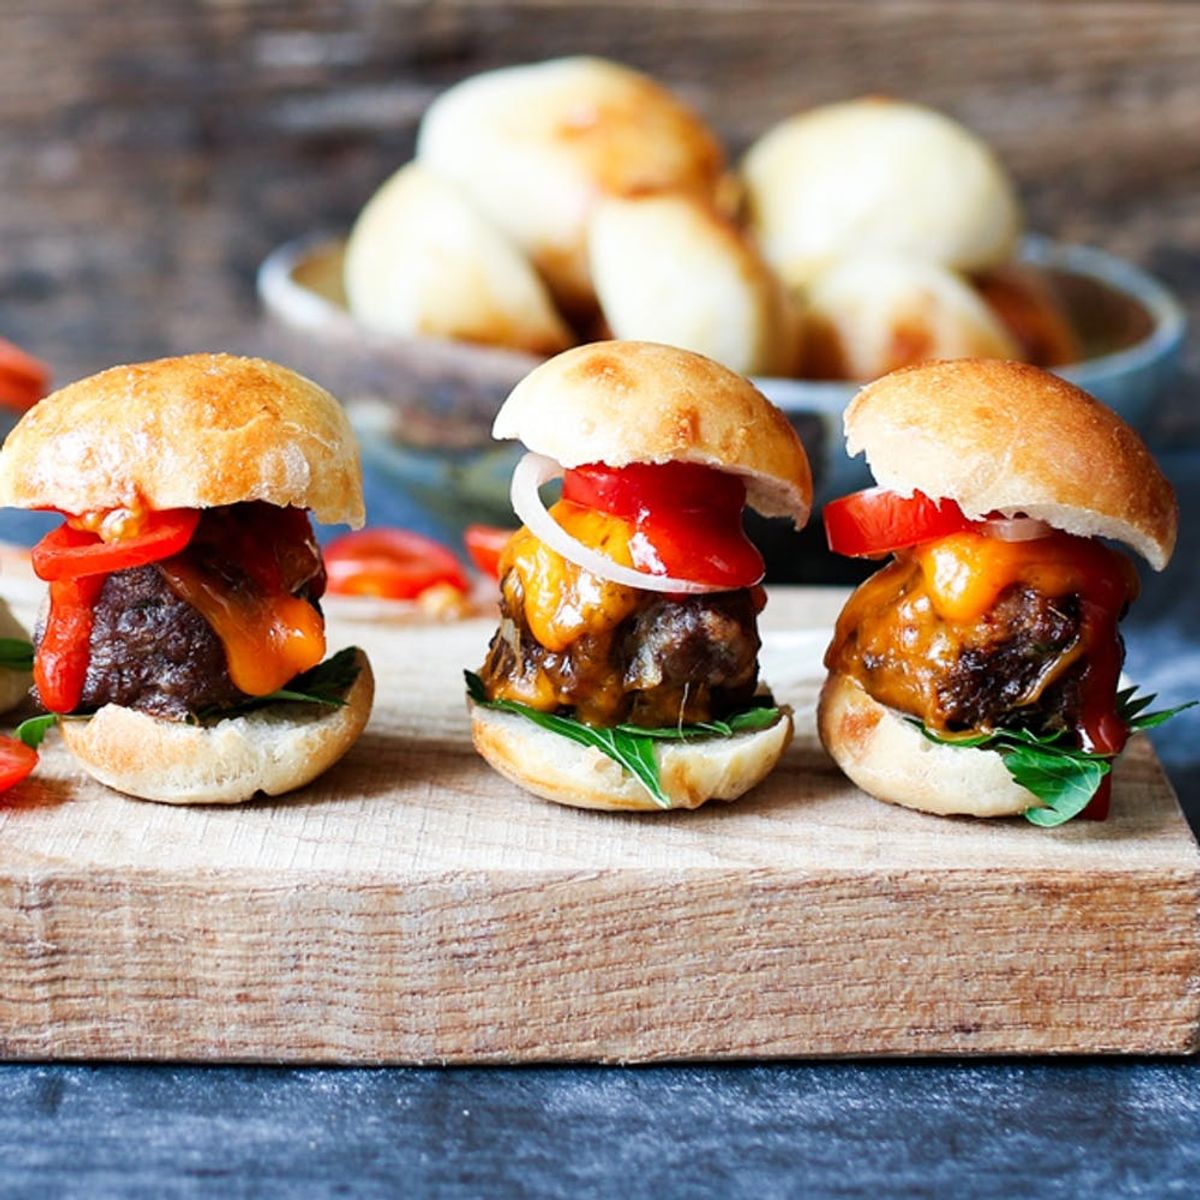 No Party Table Is Complete Without This Mini Brioche Rolls Recipe